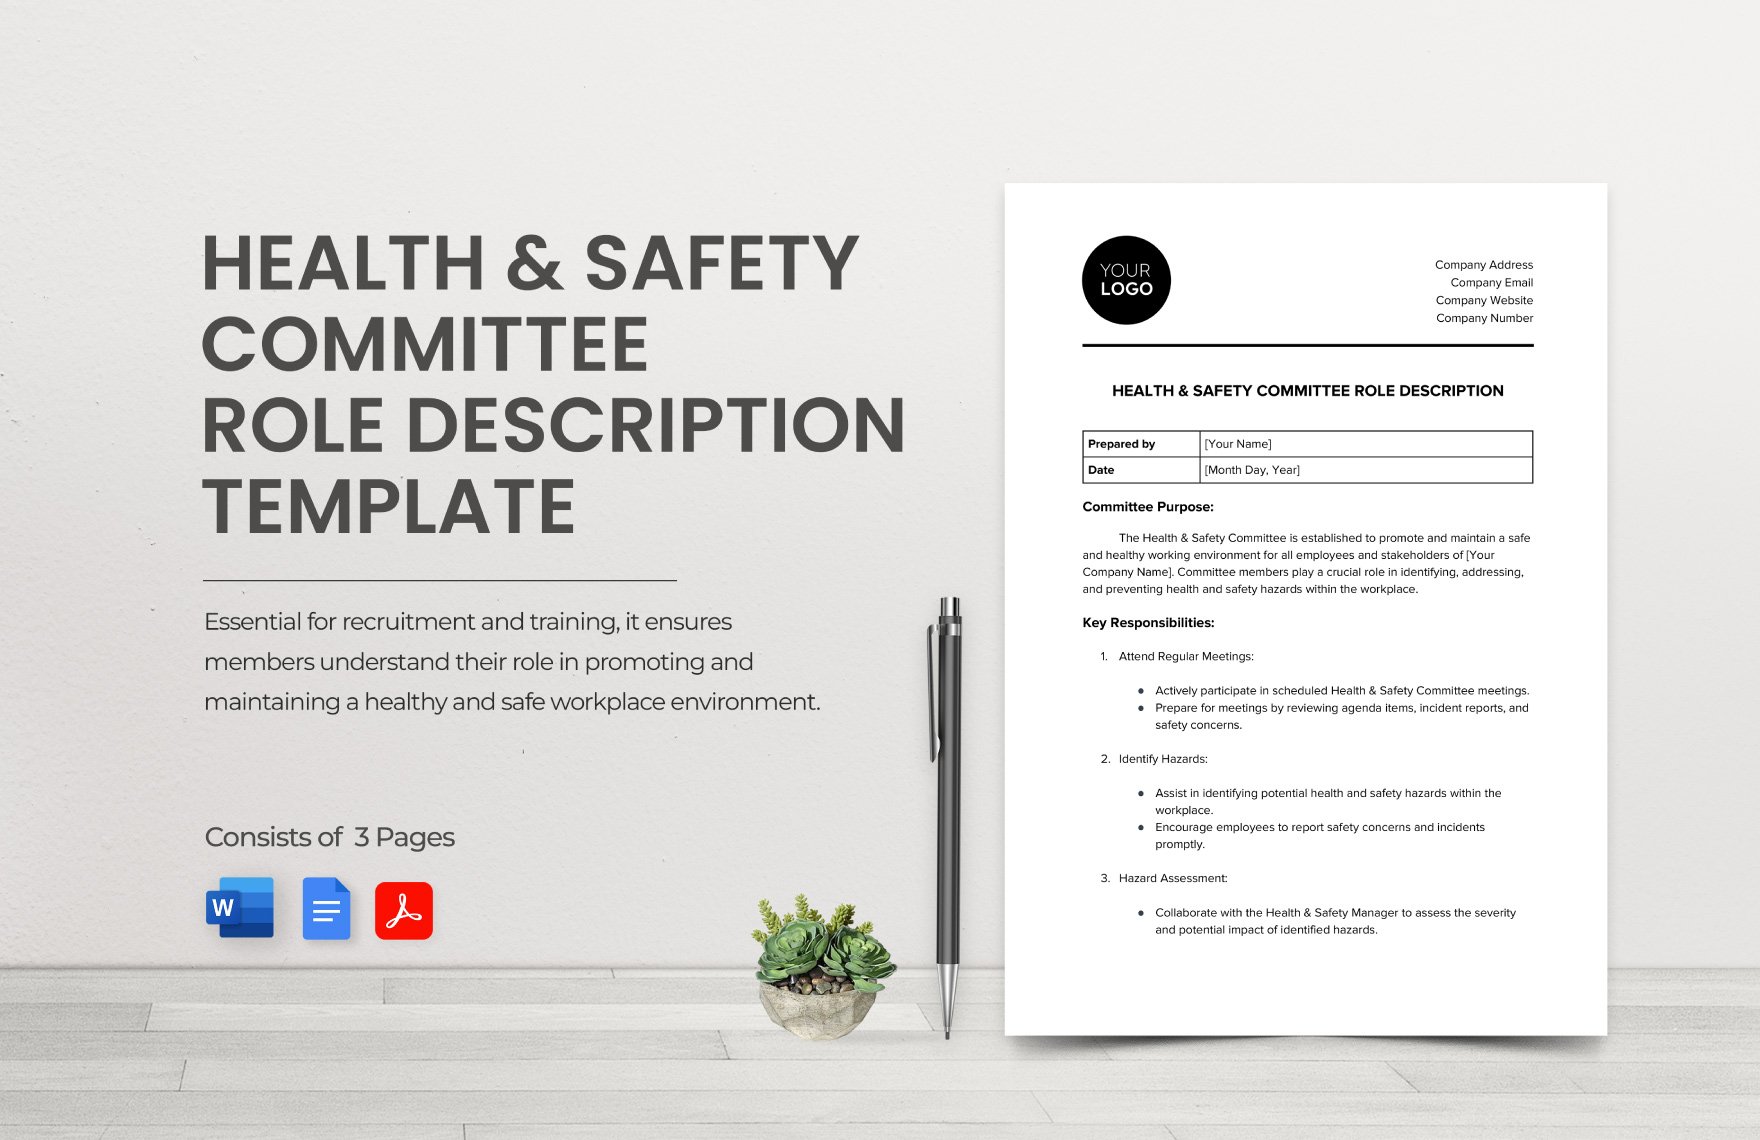 Health & Safety Committee Role Description Template